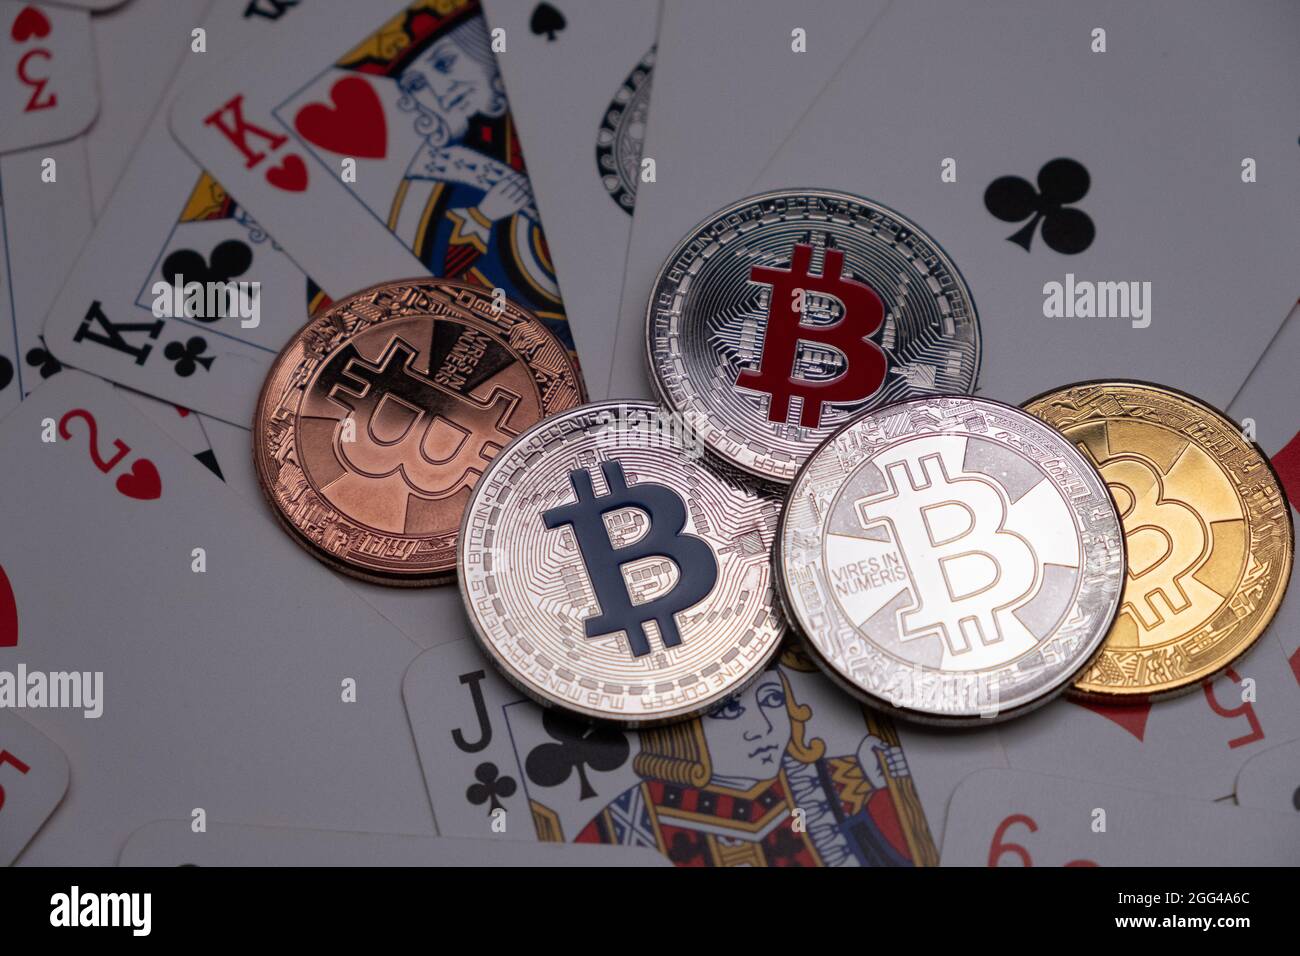 5 bitcoin casino site Issues And How To Solve Them